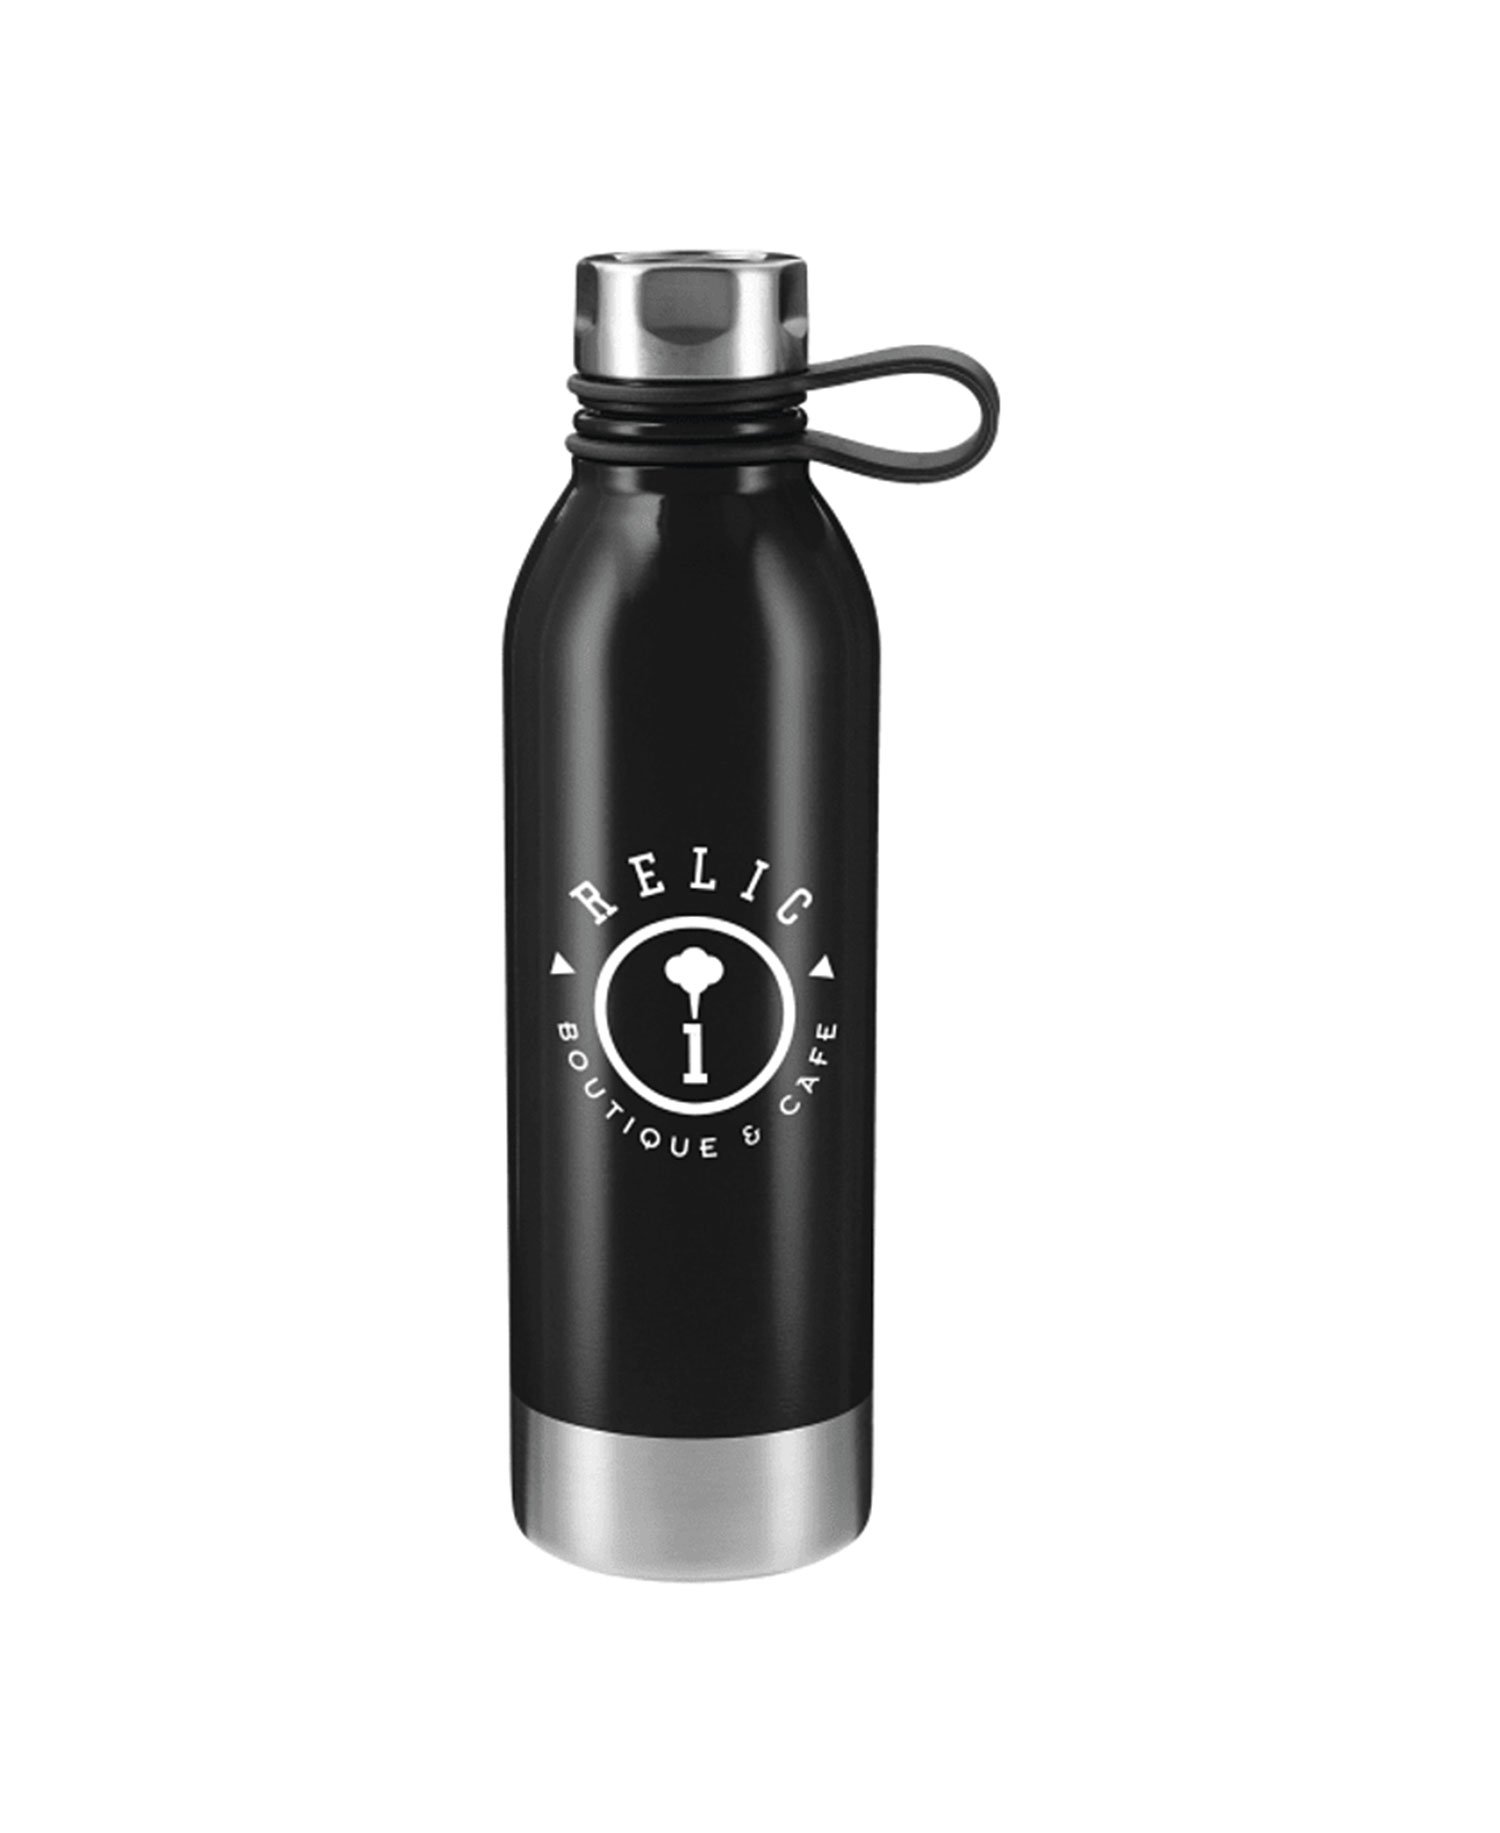 Promotional Water Bottles | 25 oz. Perth Stainless Steel Water Bottle